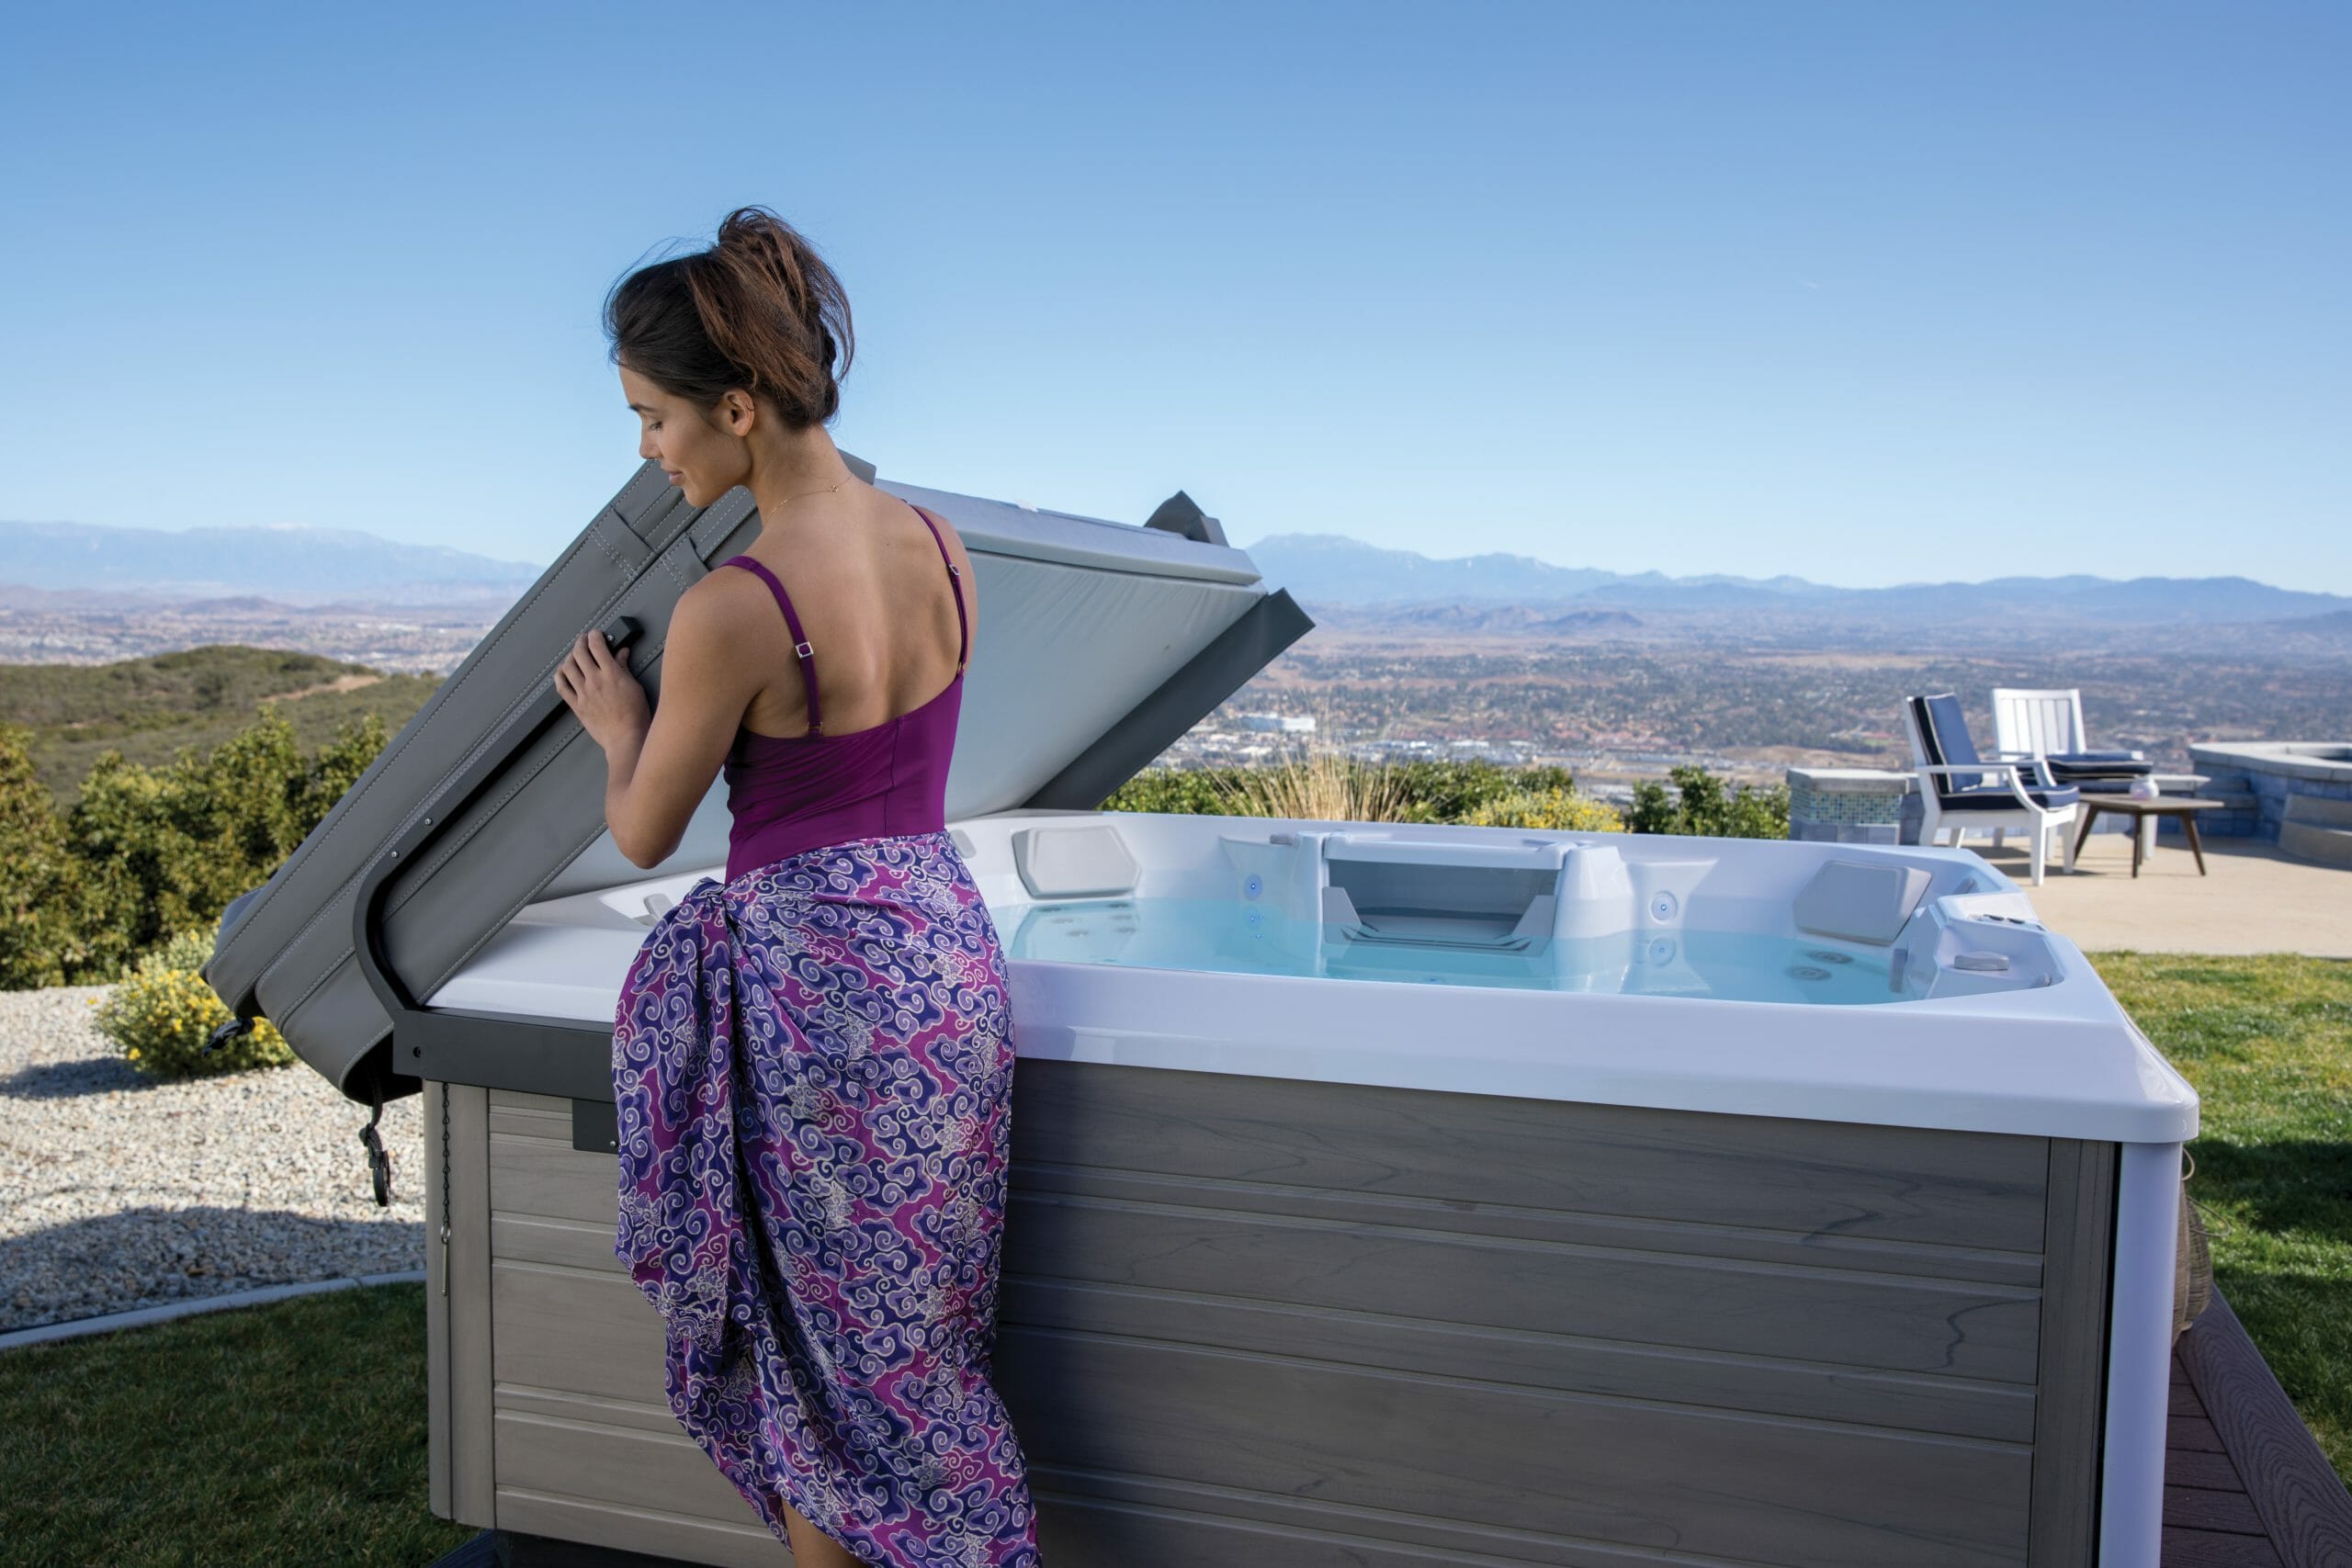 5 Common Mistakes to Avoid When Using Your Hot Tub